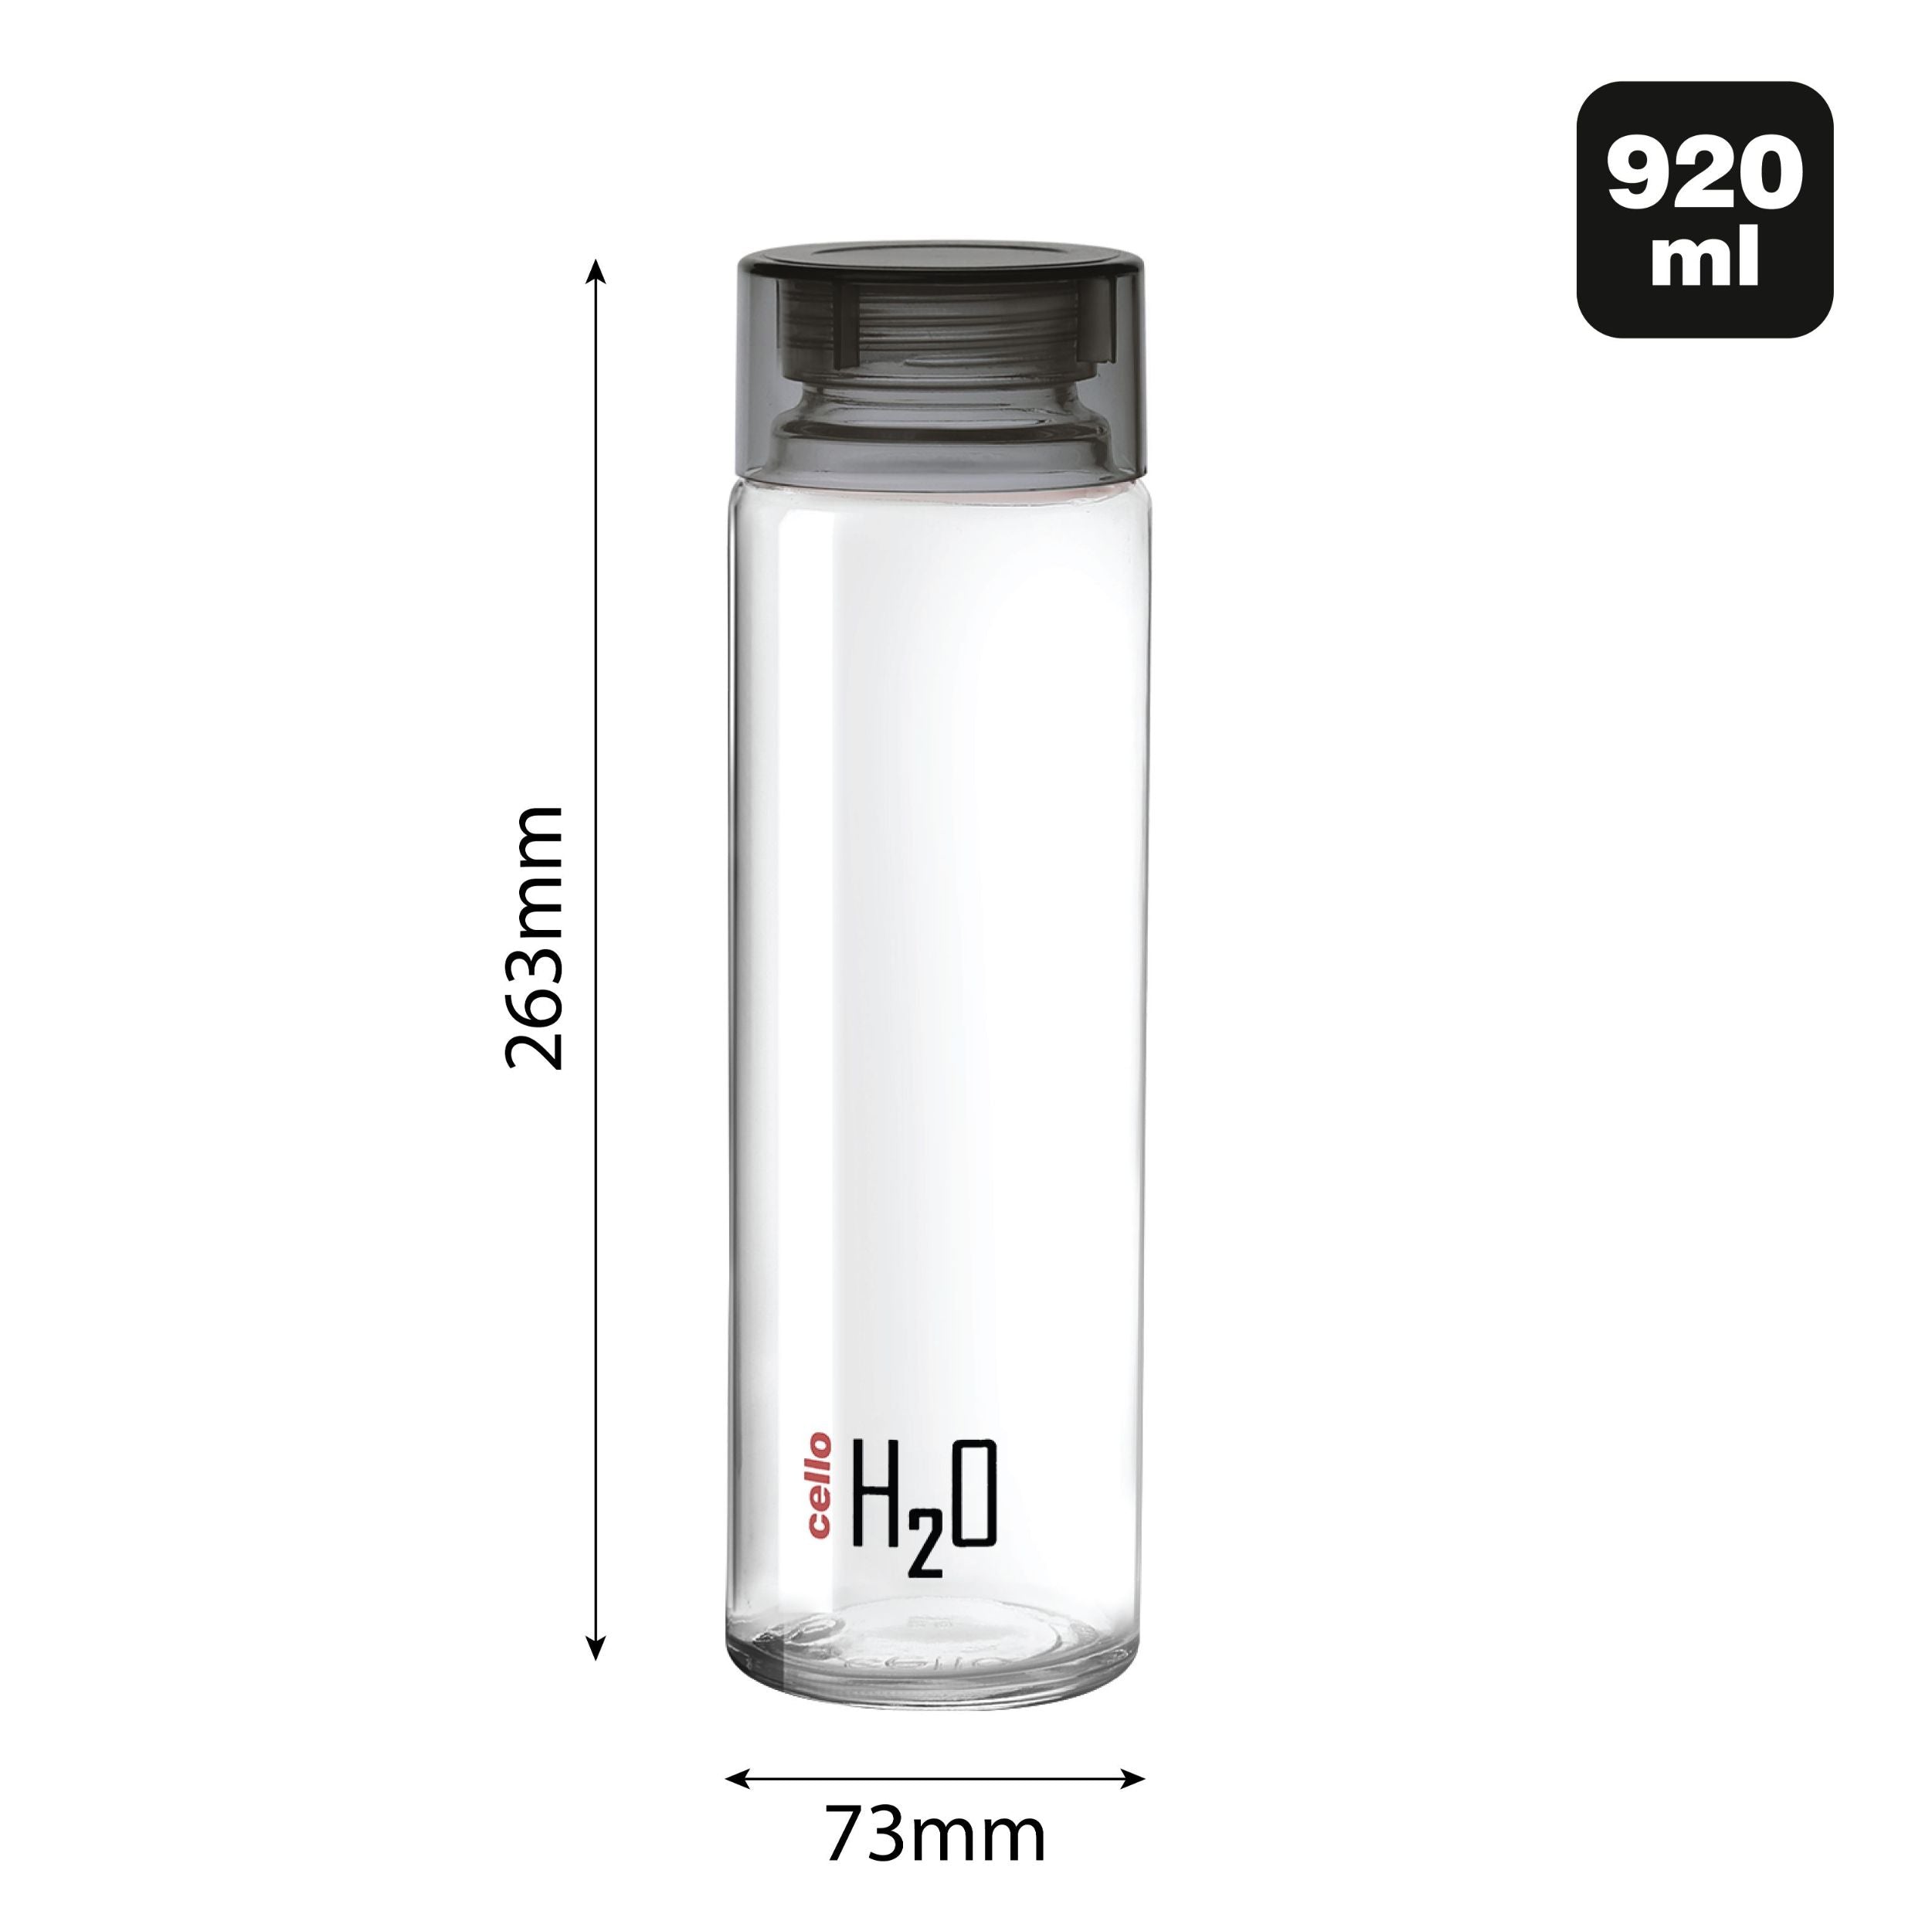 H2O Glass Water Bottle with Plastic Cap, 920ml Black / 920ml / 3 Pieces